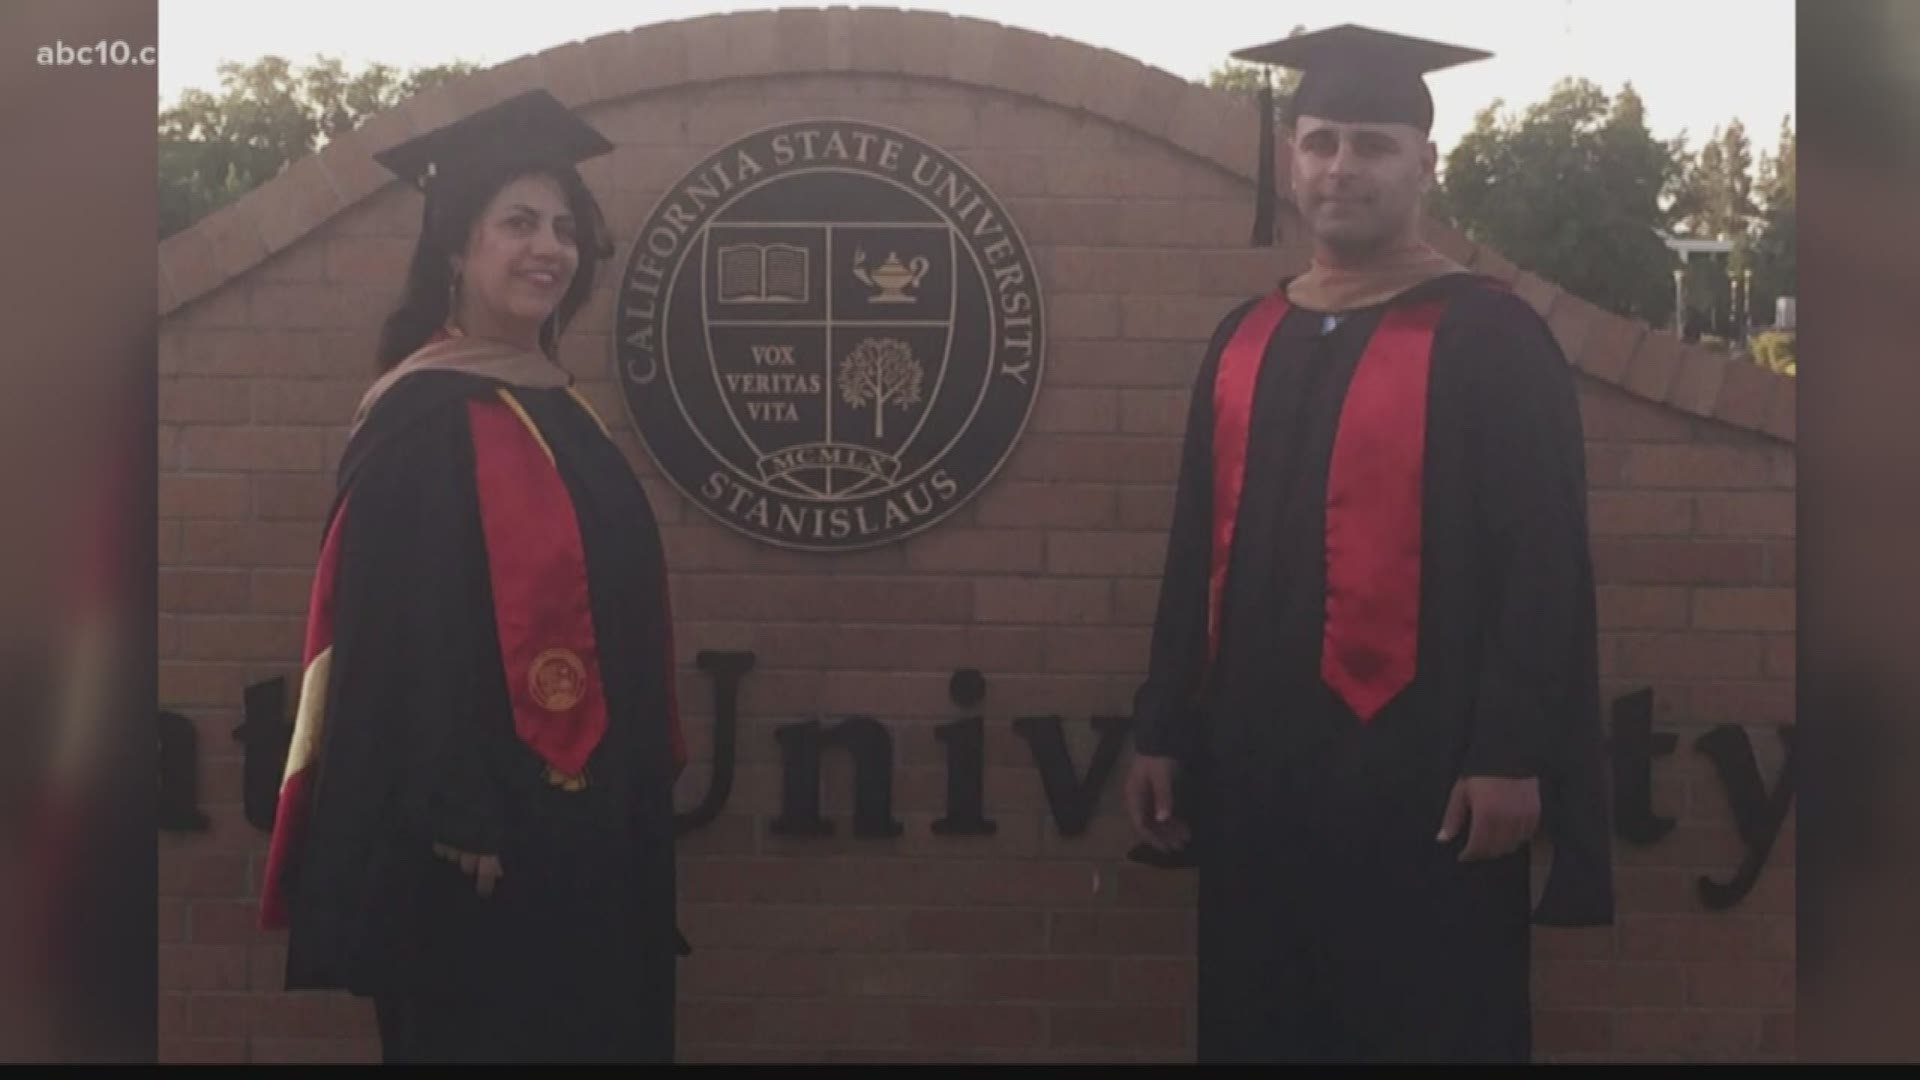 It's graduation season and Jonathan Sarhadi, 28, and Shamiran Sarhadi, 49, out of Turlock are experiencing the incredible moment together with matching Master's degrees at California State University, Stanislaus. (May 16, 2018)